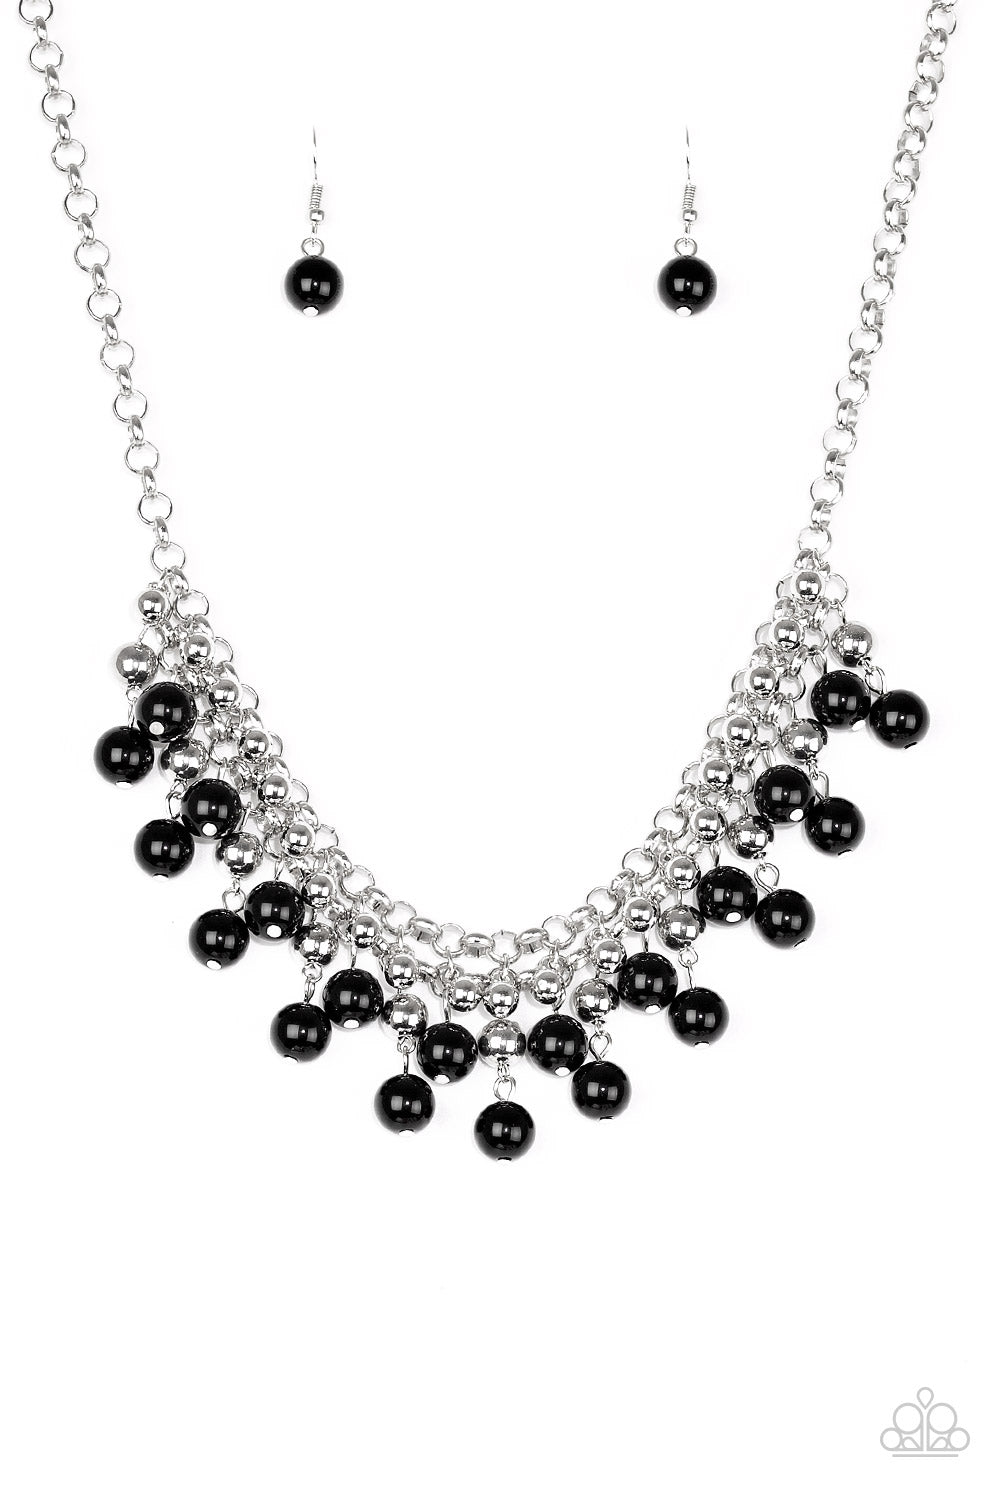 five-dollar-jewelry-friday-night-fringe-black-necklace-paparazzi-accessories